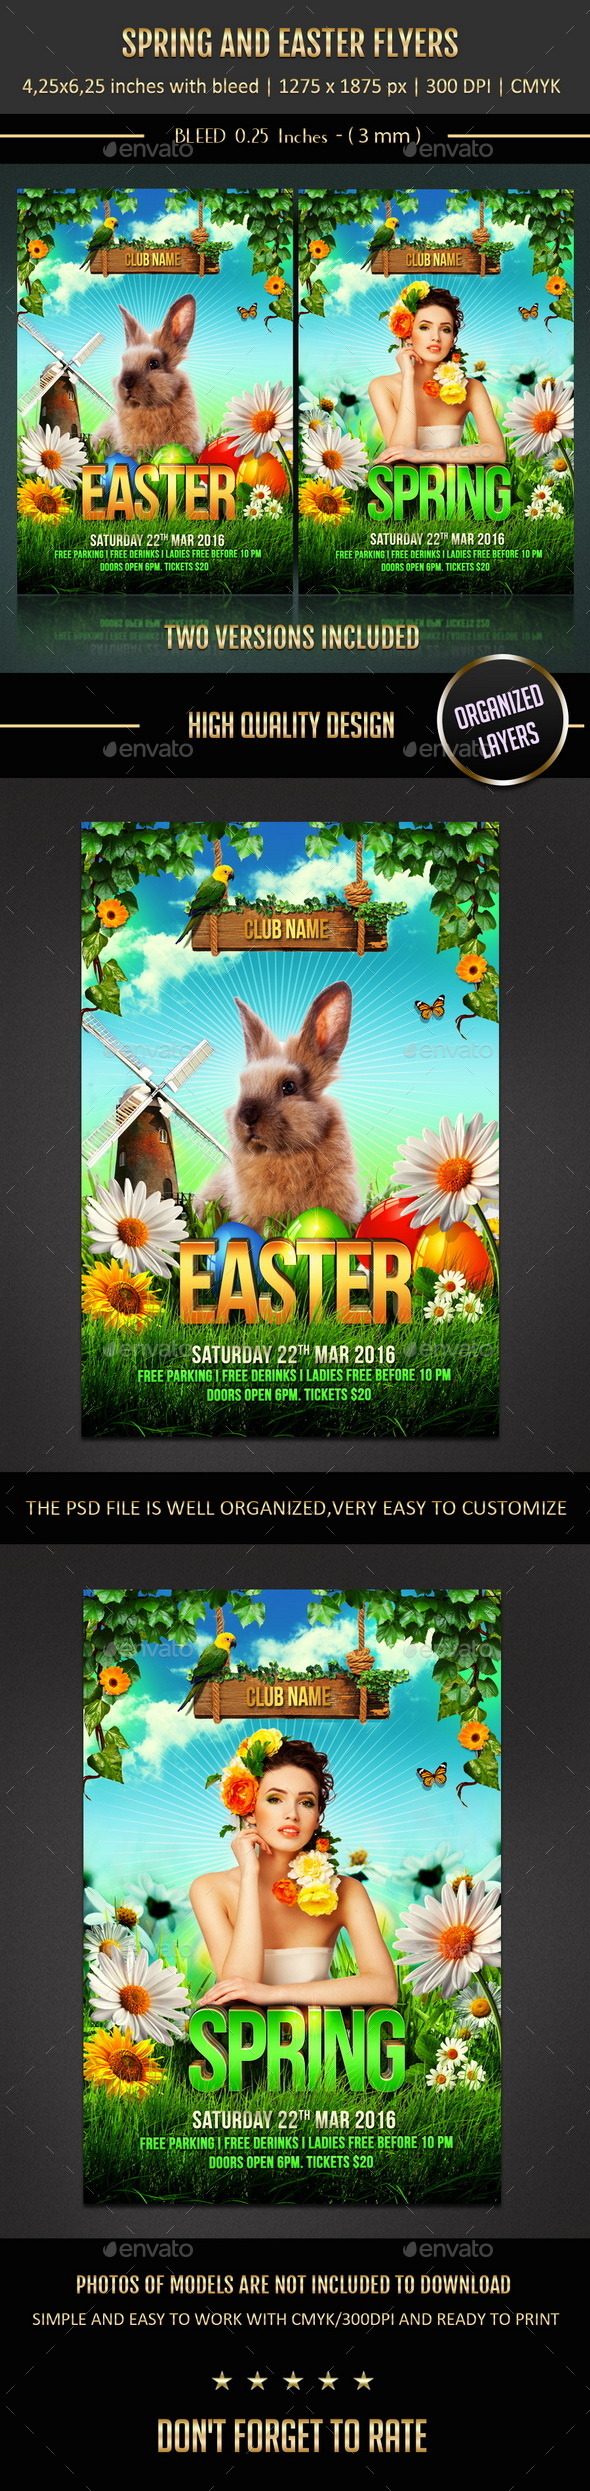 Spring and Easter Flyers